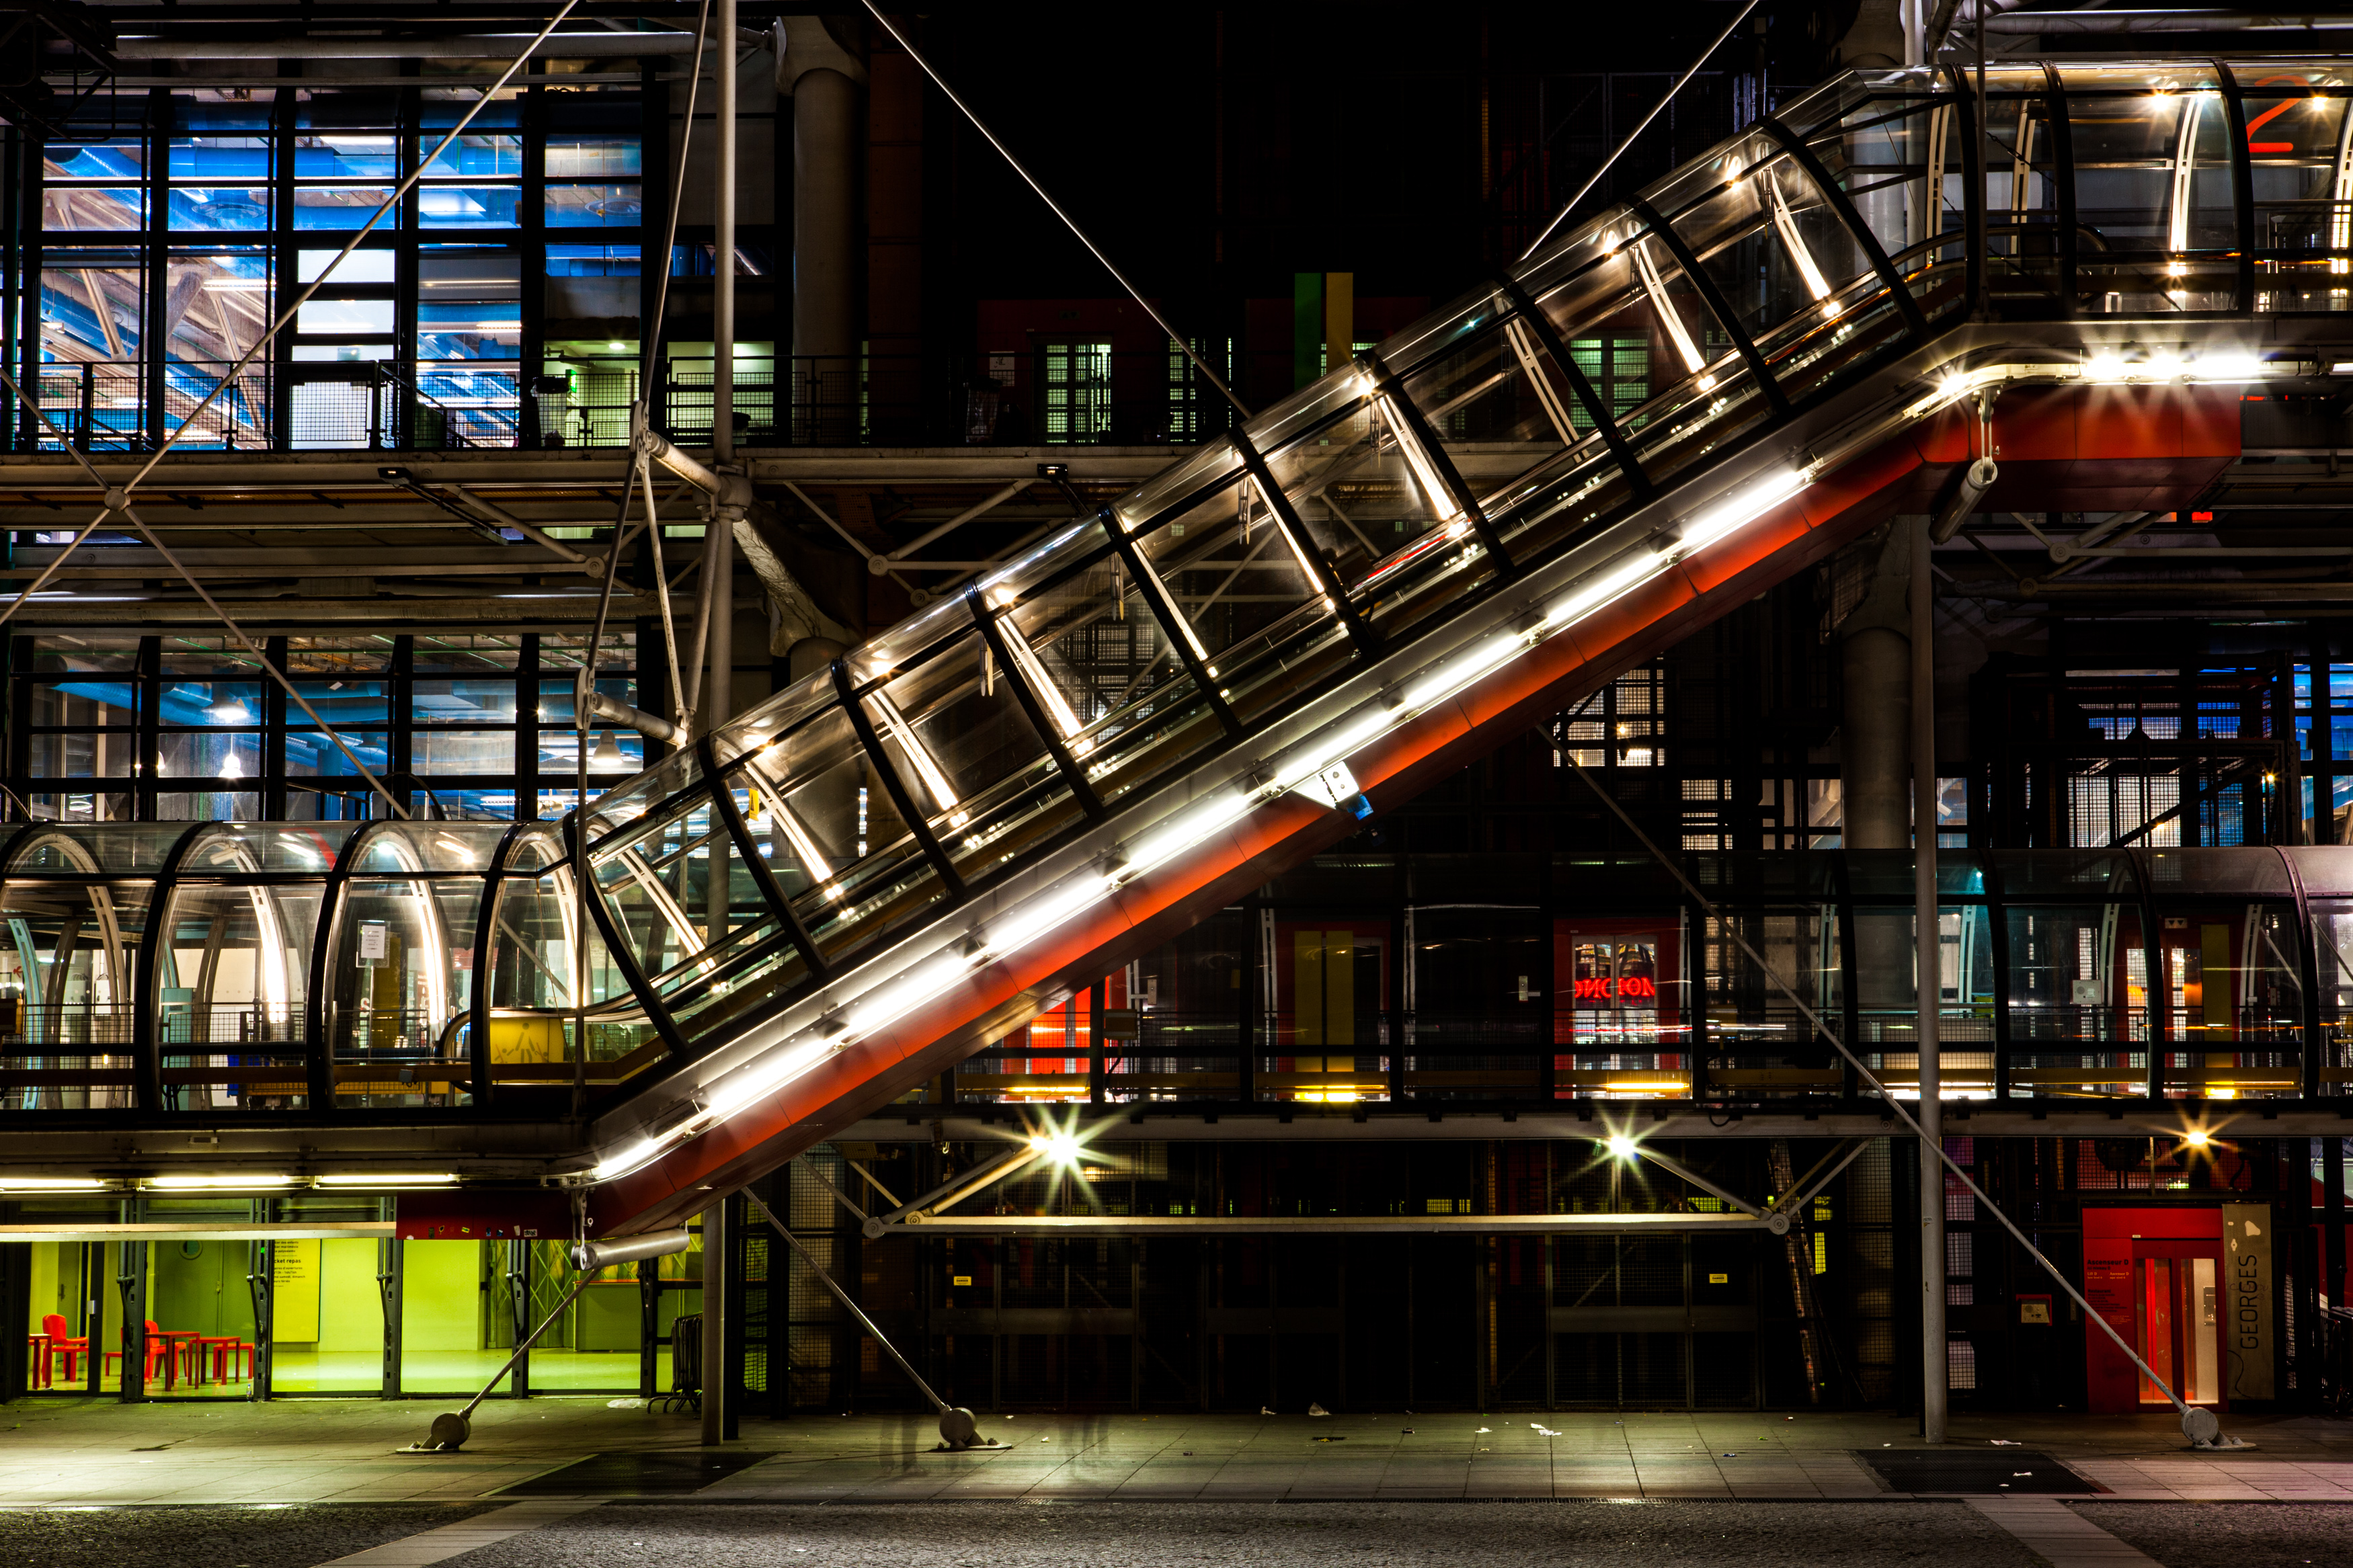 Photo of the exterior escalator of the Pompidou Center, at night, with lights of different colors in the building